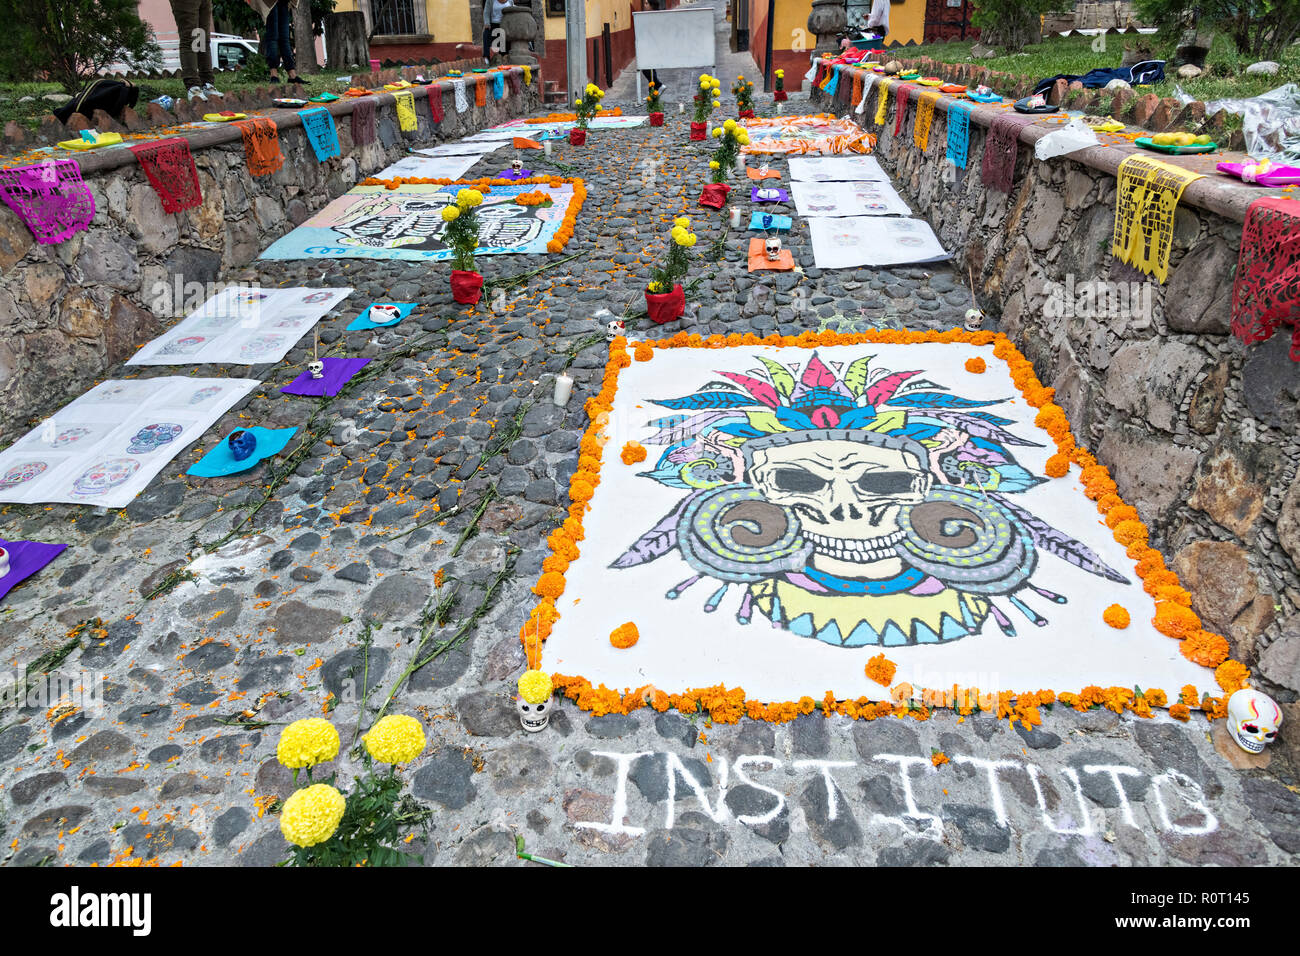 Dead of the Dead sand paintings on display outside the San Juan de Dios Church during the Dia de Muertos festival in San Miguel de Allende, Mexico. The multi-day festival is to remember friends and family members who have died using calaveras, aztec marigolds, alfeniques, papel picado and the favorite foods and beverages of the departed. Stock Photo